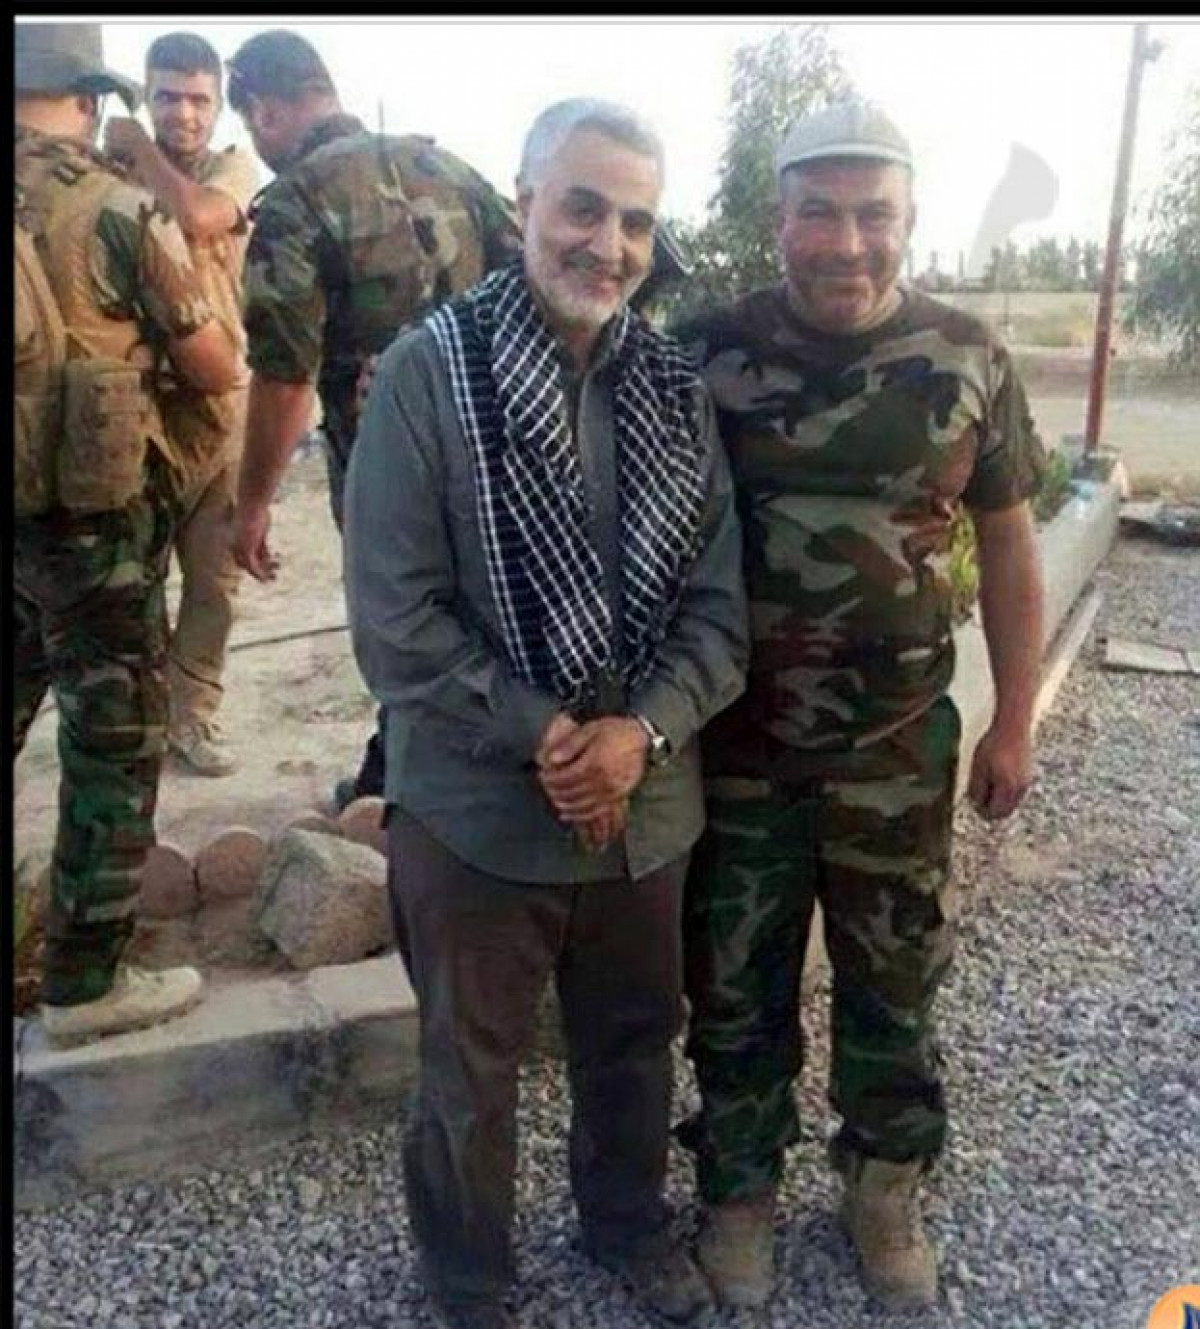 Qassem Soleimani and Emad Moghniyeh in the same place during 2006 war